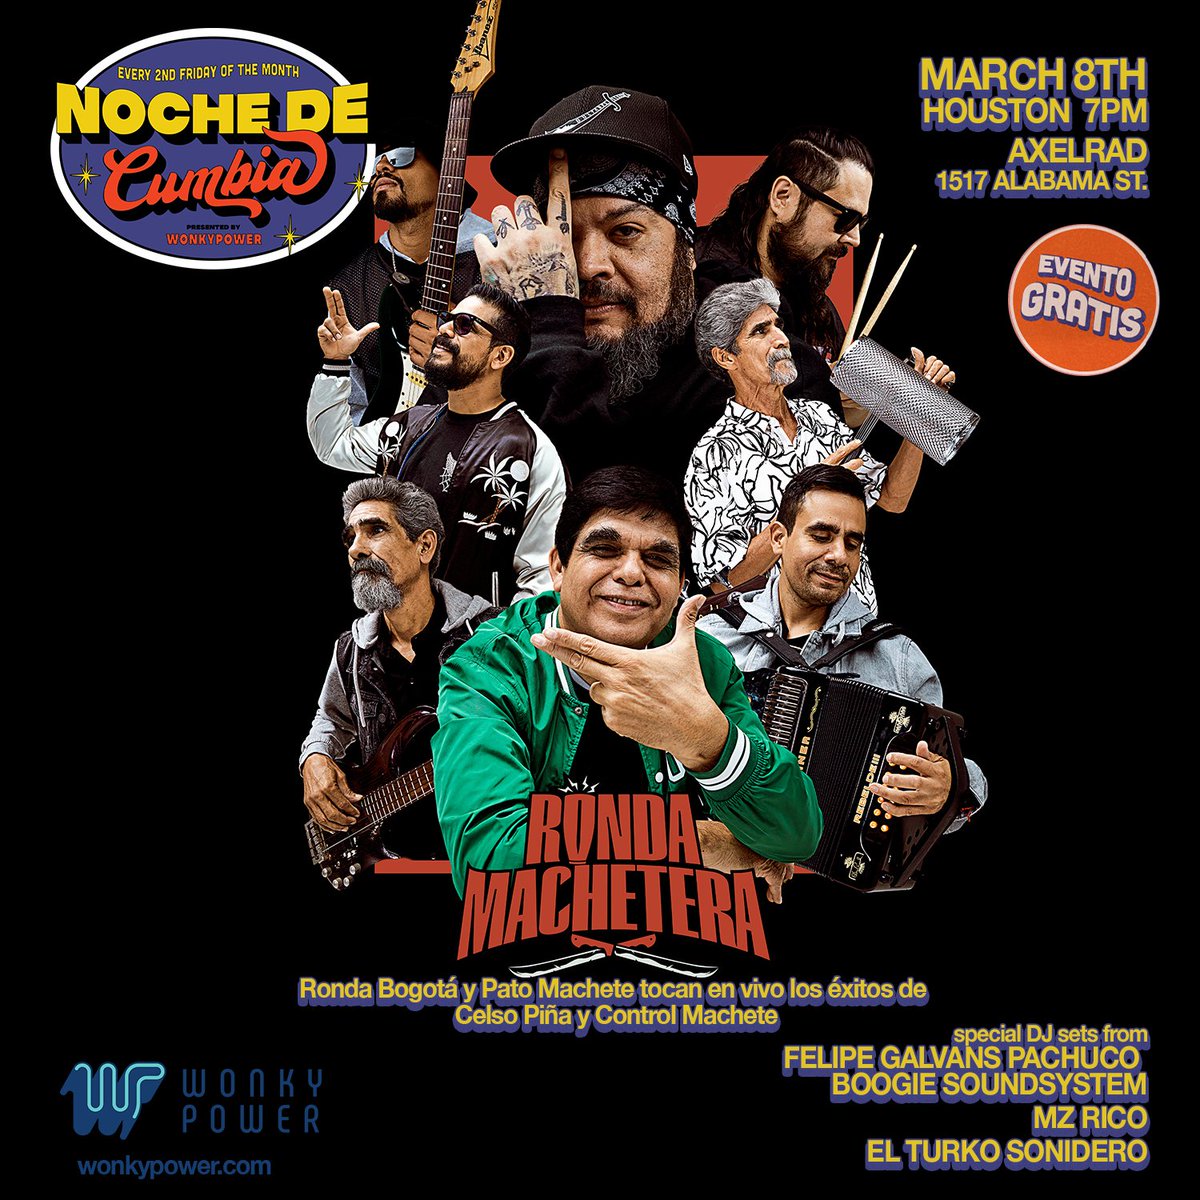 This one will be one of the greatest Cumbia nights in Houston, hands down!! Ronda Machetera arrives this Friday with their legendary sound, and they'll perform classics from Celso Piña and Control Machete. Spread the word now! Live at @axelradhouston Presented by Noche de Cumbia